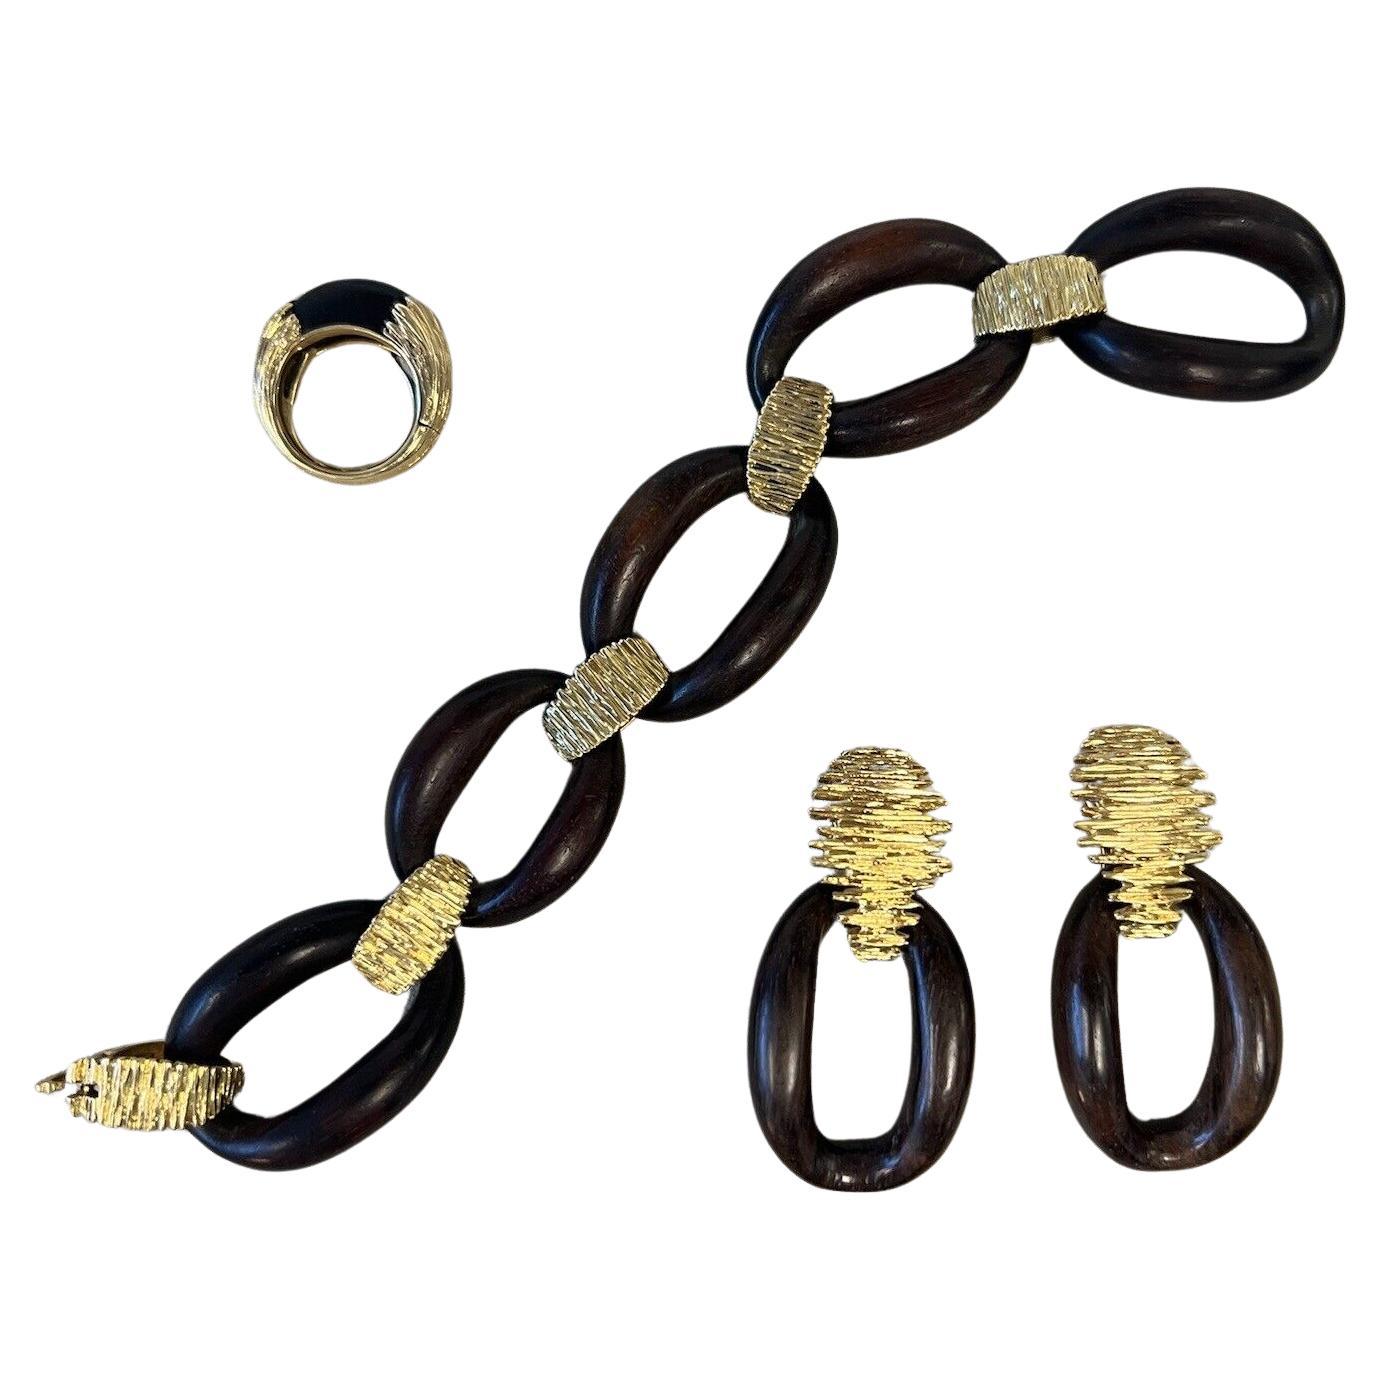 Buy Unique Ad Stone Gold Bracelet with Ring Attached Gold Panja Bracelet